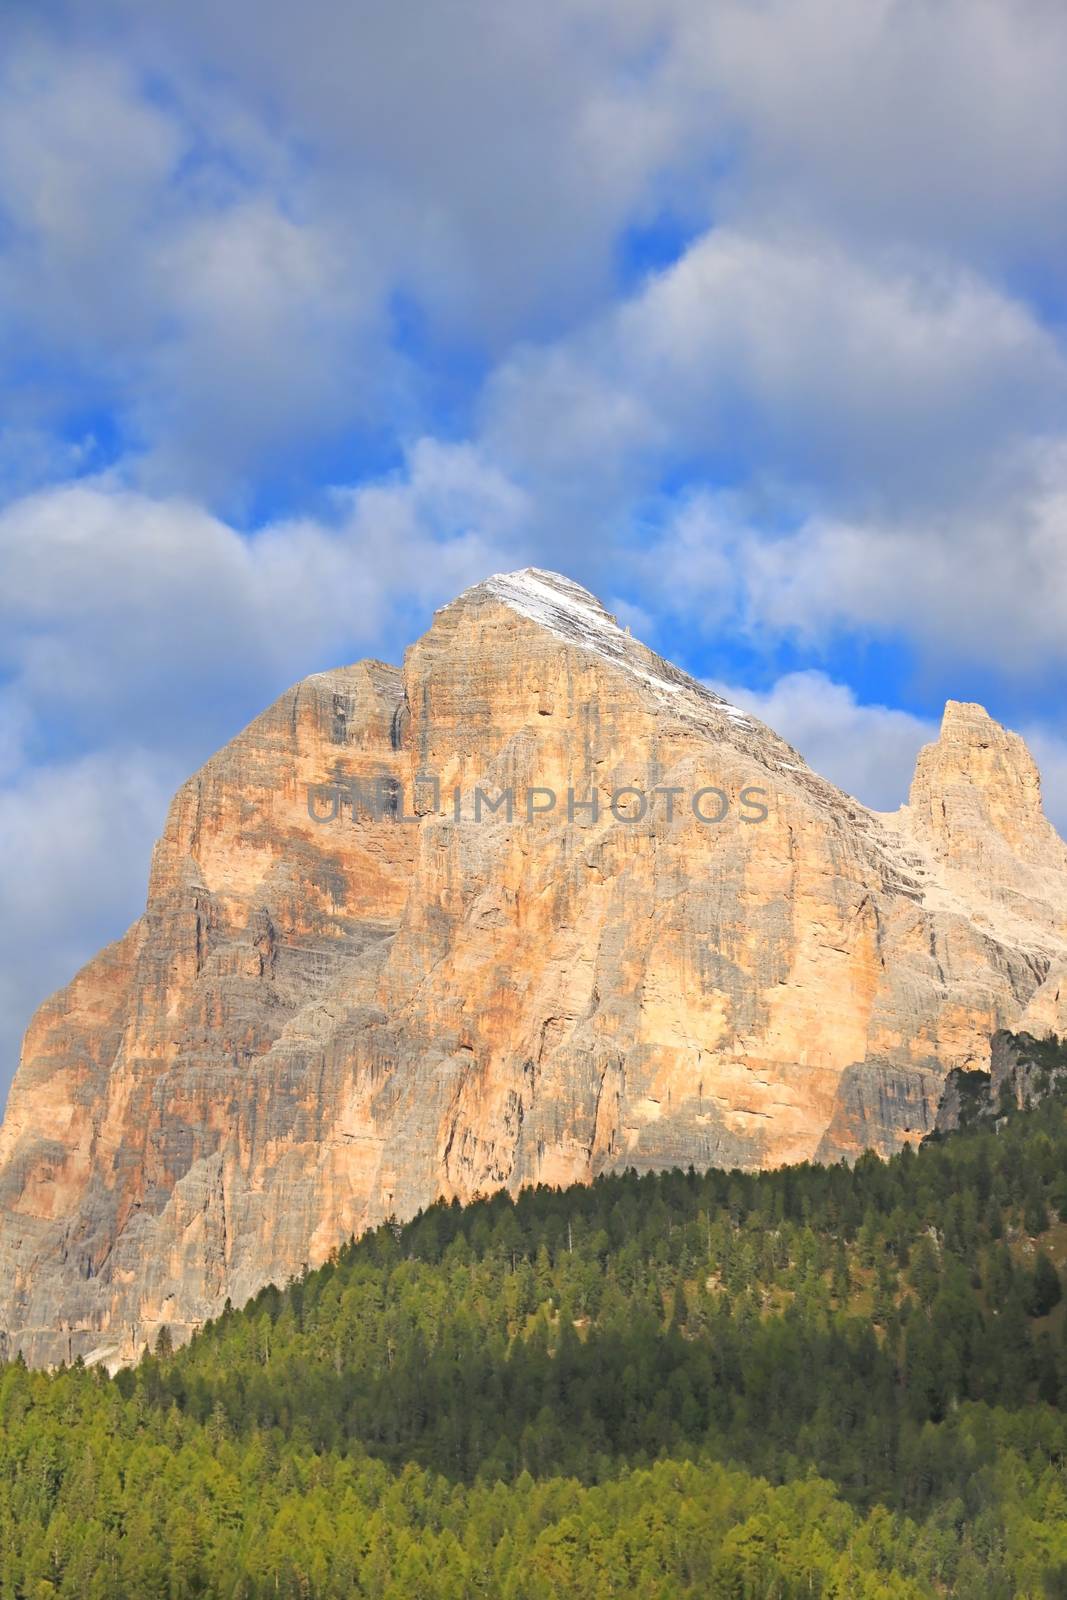 Beautiful Dolomites in Italy. Clear day with blue sky. Mountains are illuminated by the rays of the sun. Clean fresh air. Selective focus. by kip02kas